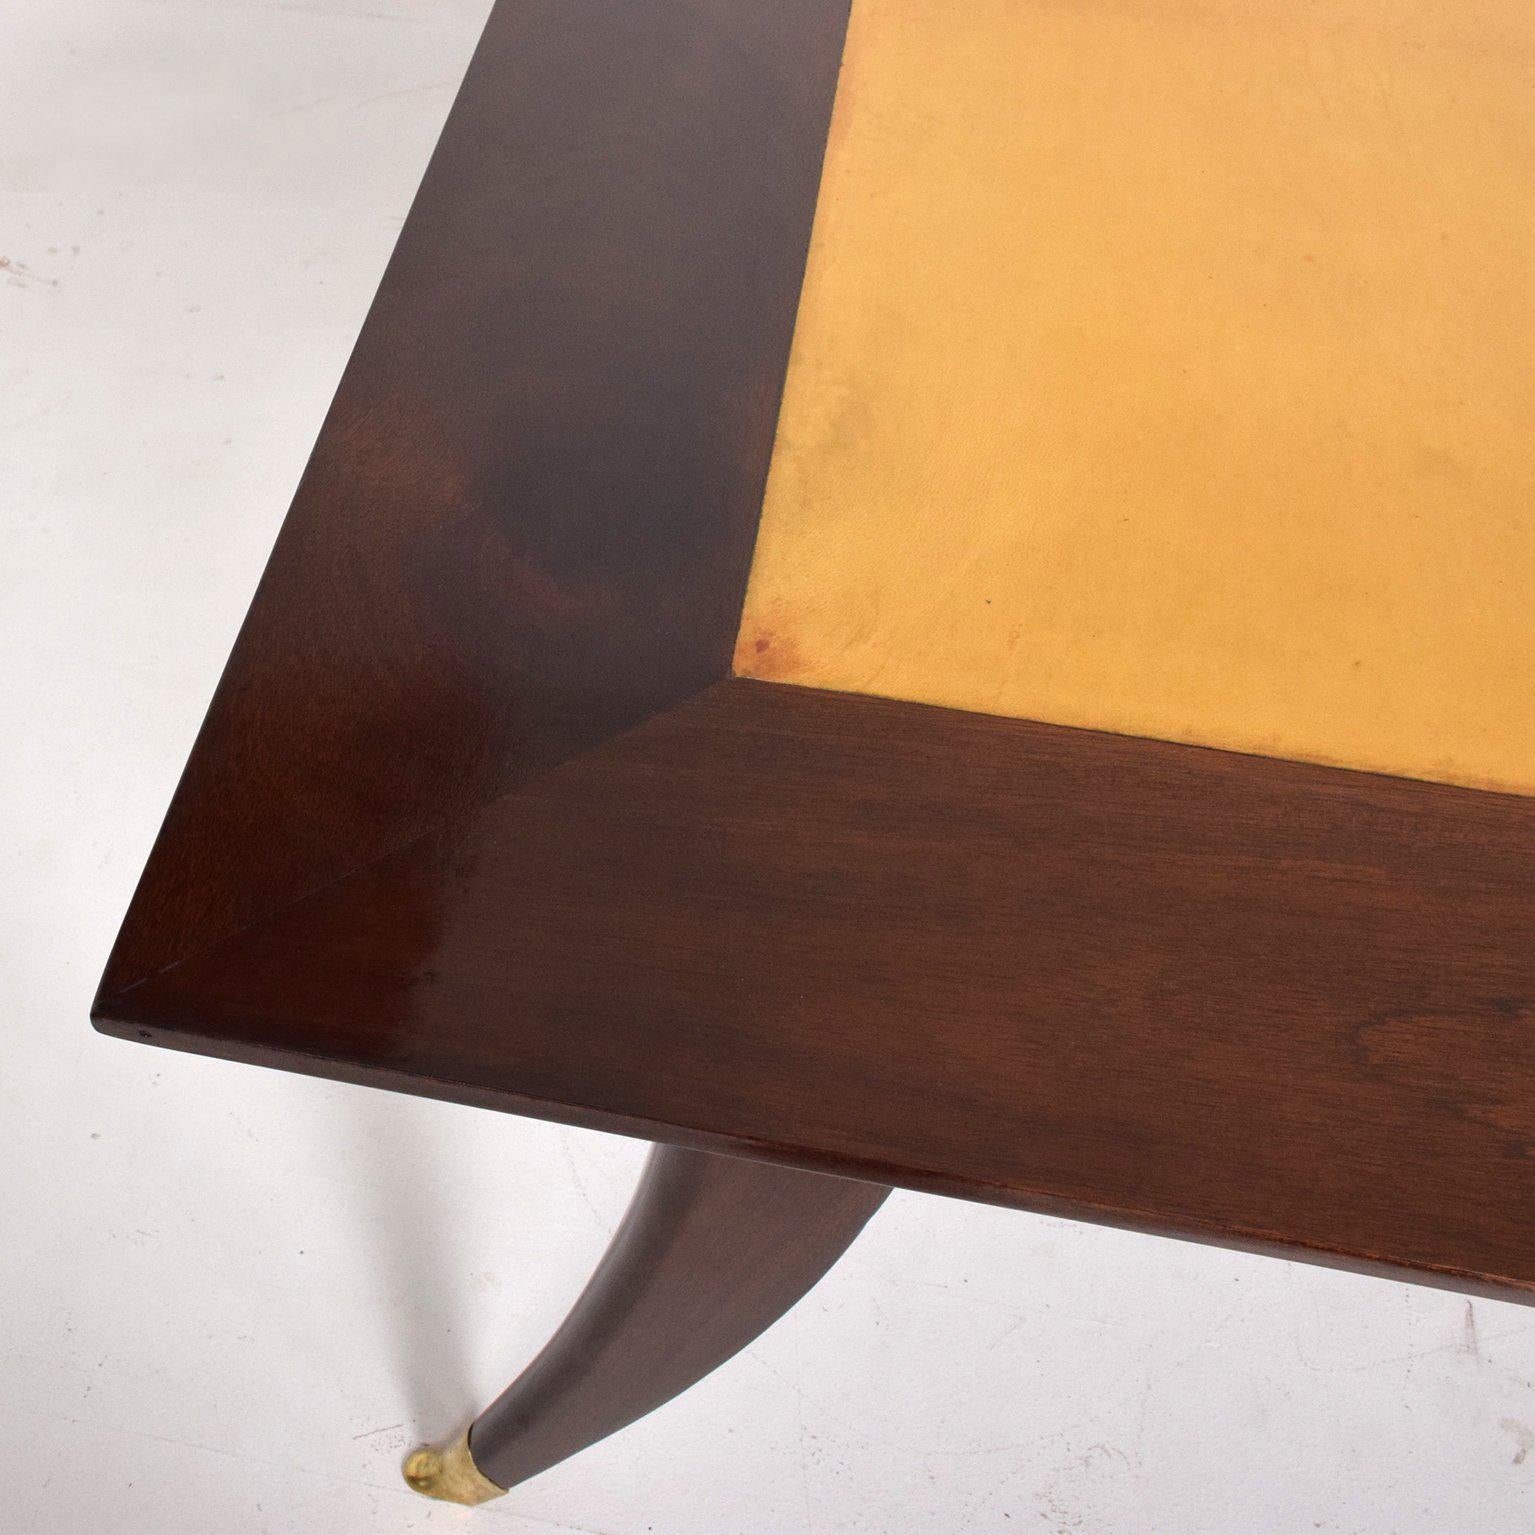 Mid-20th Century Mexican Modernist Mahogany Goatskin Dining Table Arturo Pani Attributed